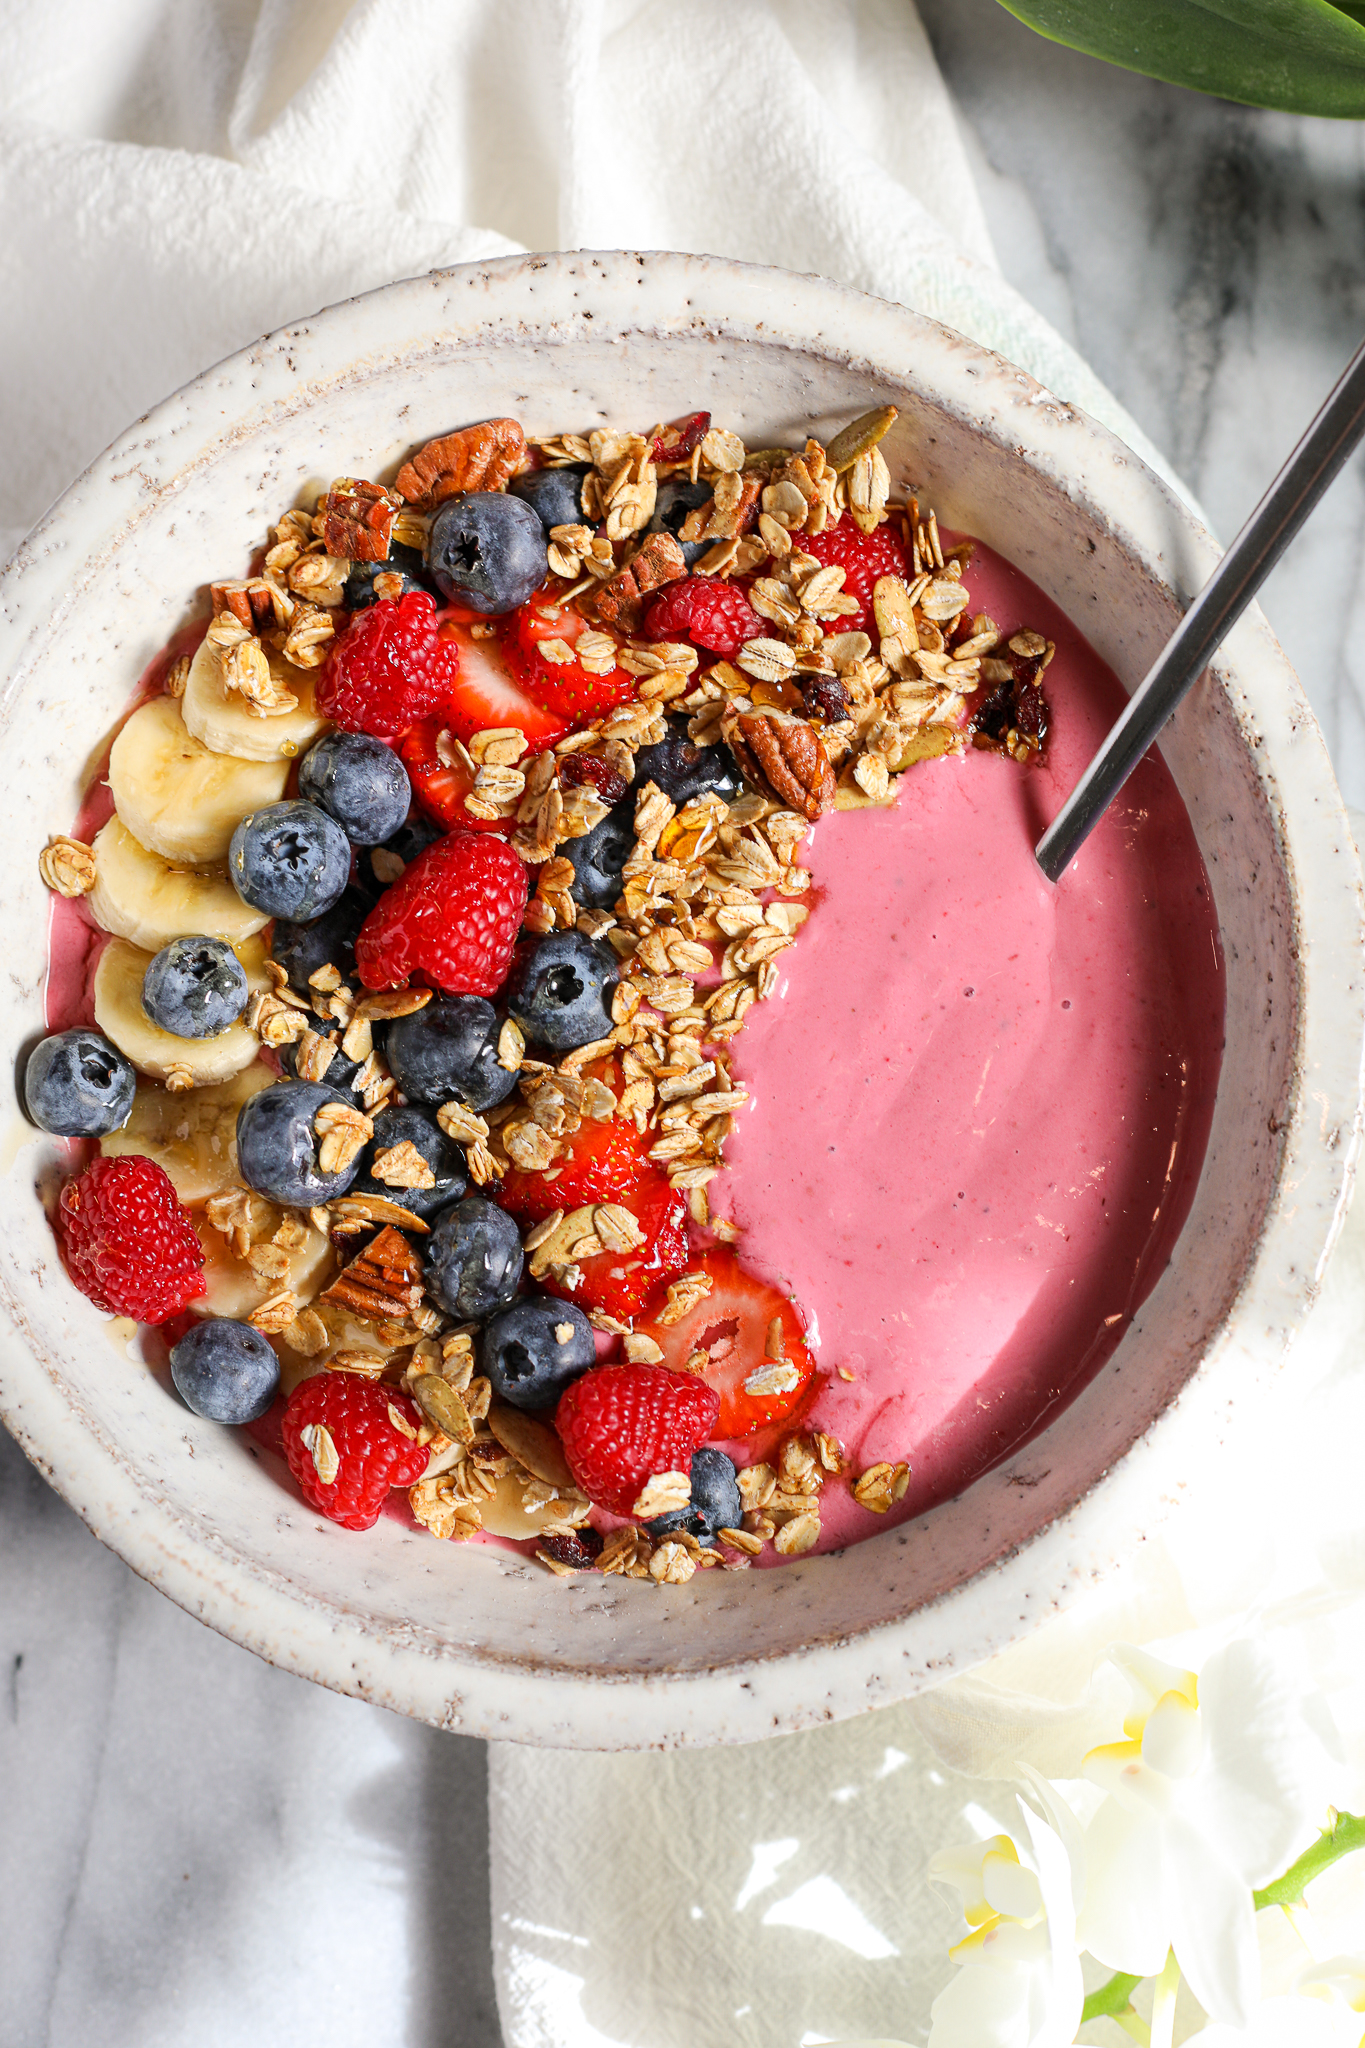 Bowl filled with brightly colored raspberry smoothie and topped with sliced bananas, sliced strawberries, blueberries, raspberries, granola, and honey.